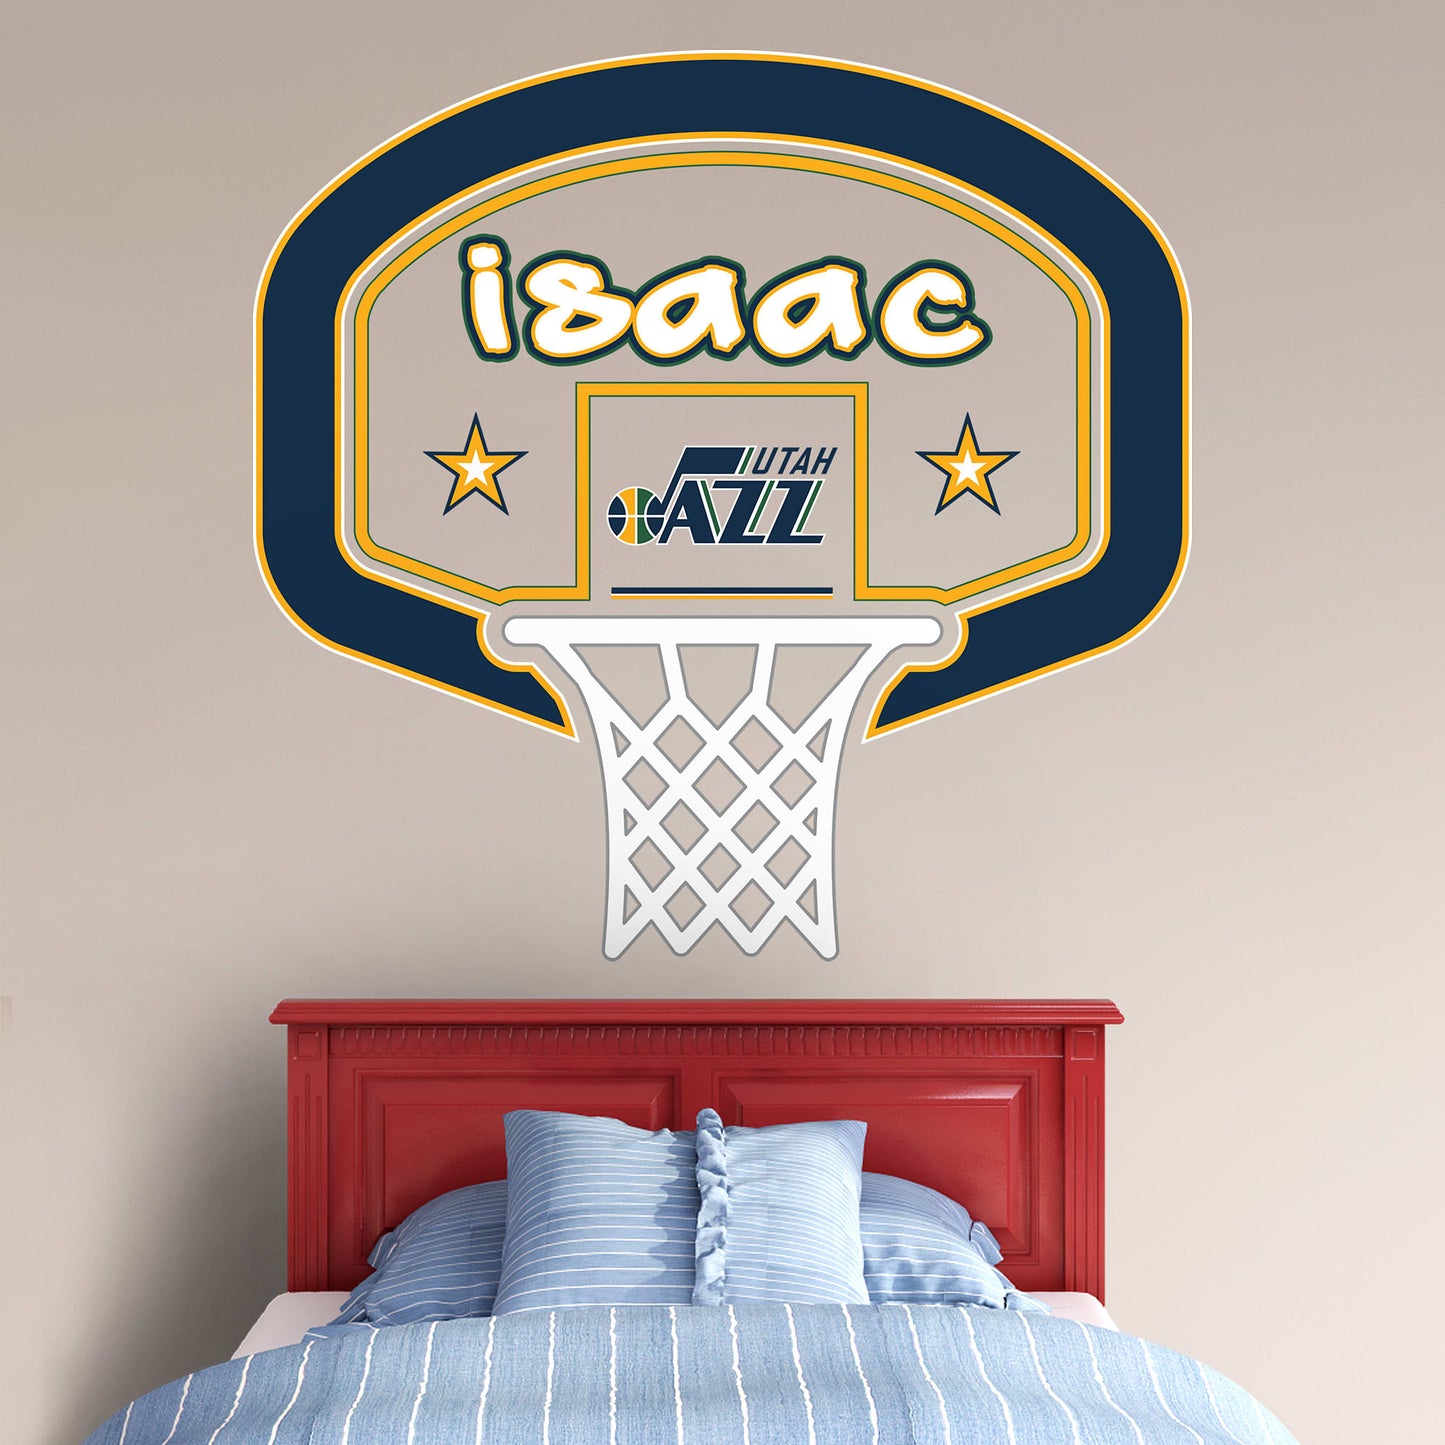 Utah Jazz: Personalized Name - Officially Licensed NBA Transfer Decal